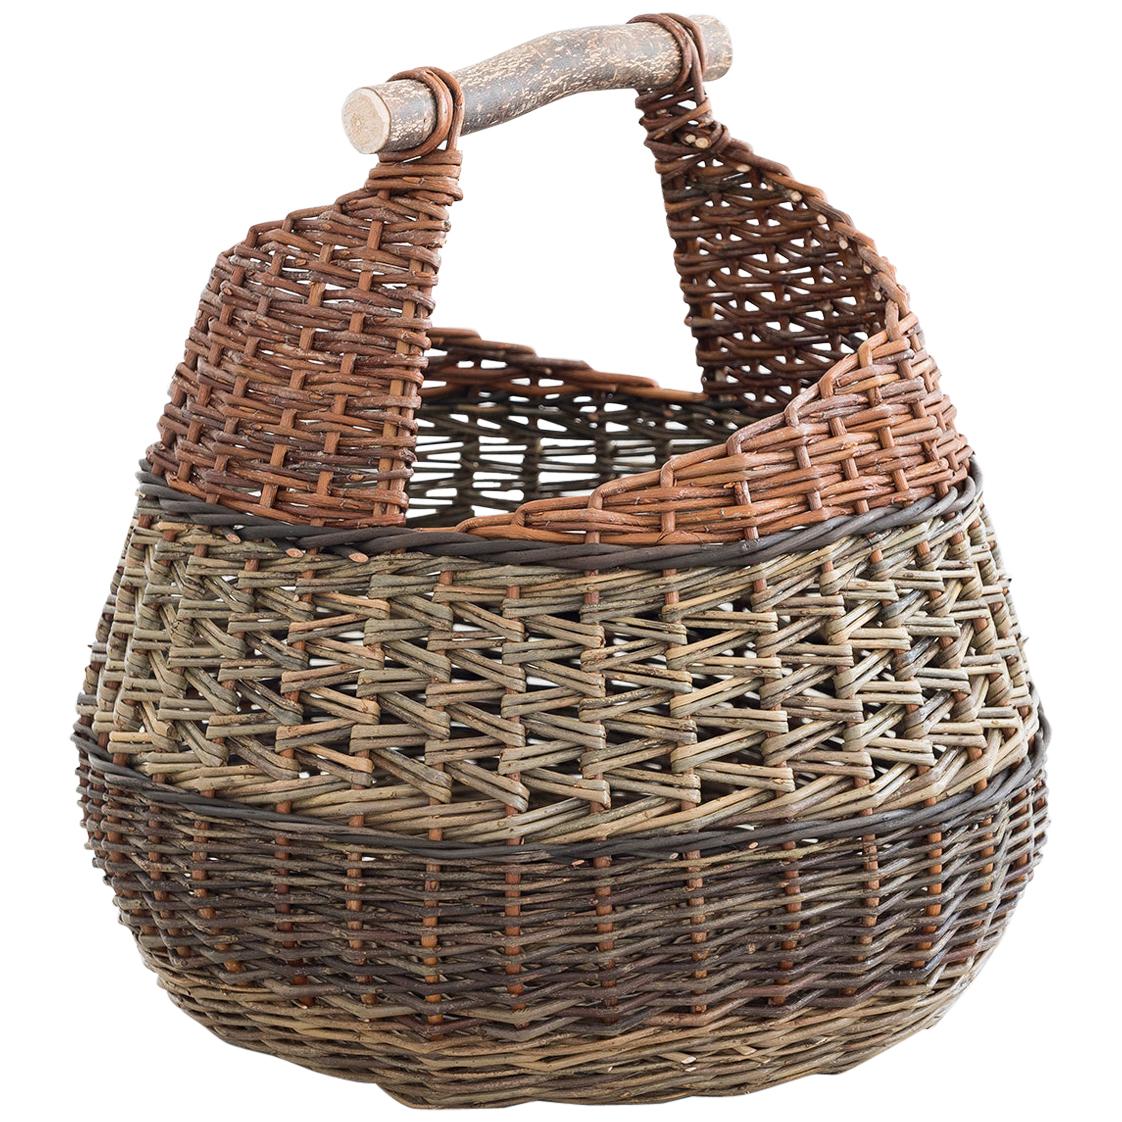 Mónica Guilera Subirana, Baskets Willow with Wooden Handle, Contemporary Craft